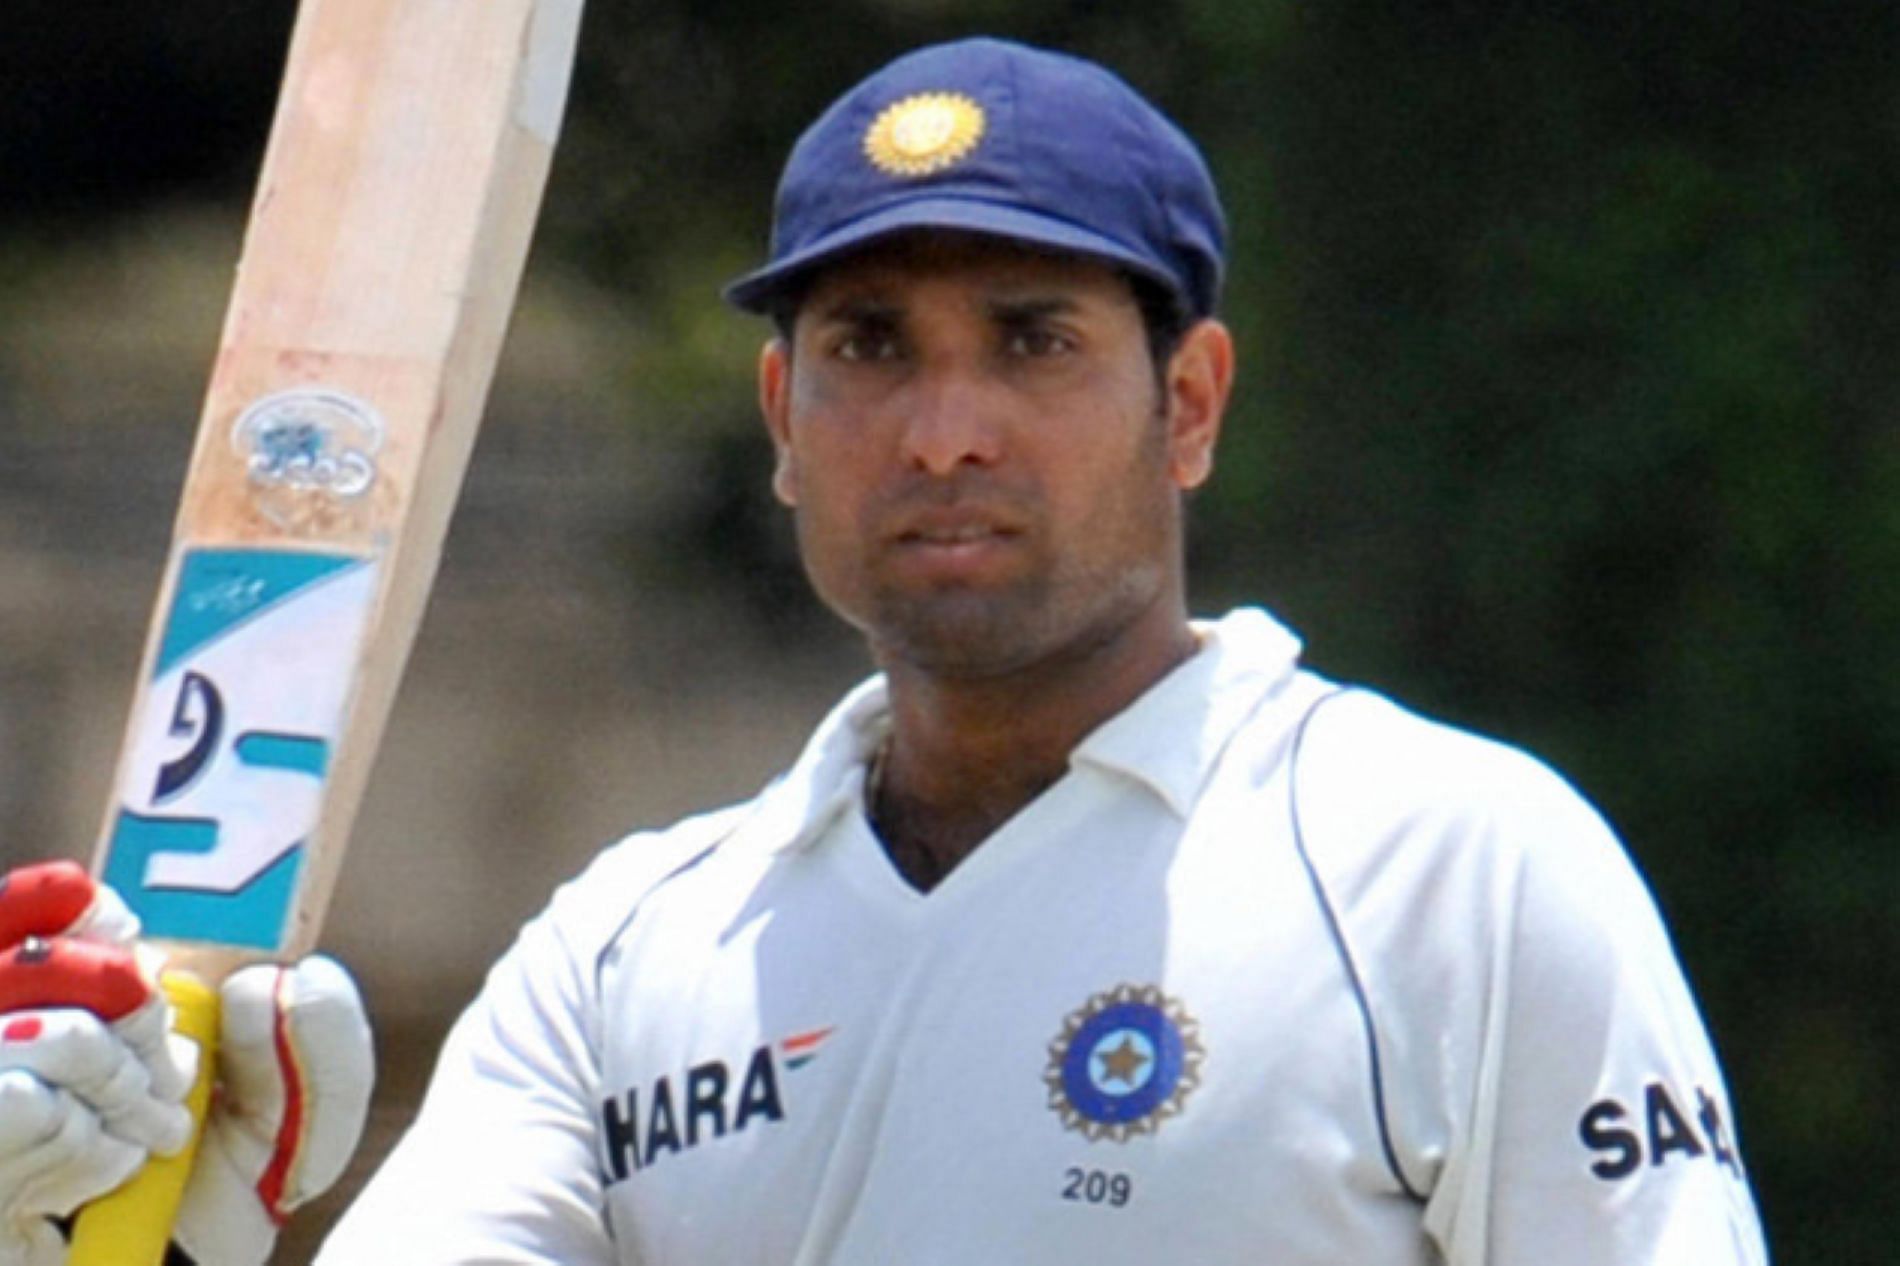 VVS Laxman saved India during crisis on innumerable occasions in Tests.